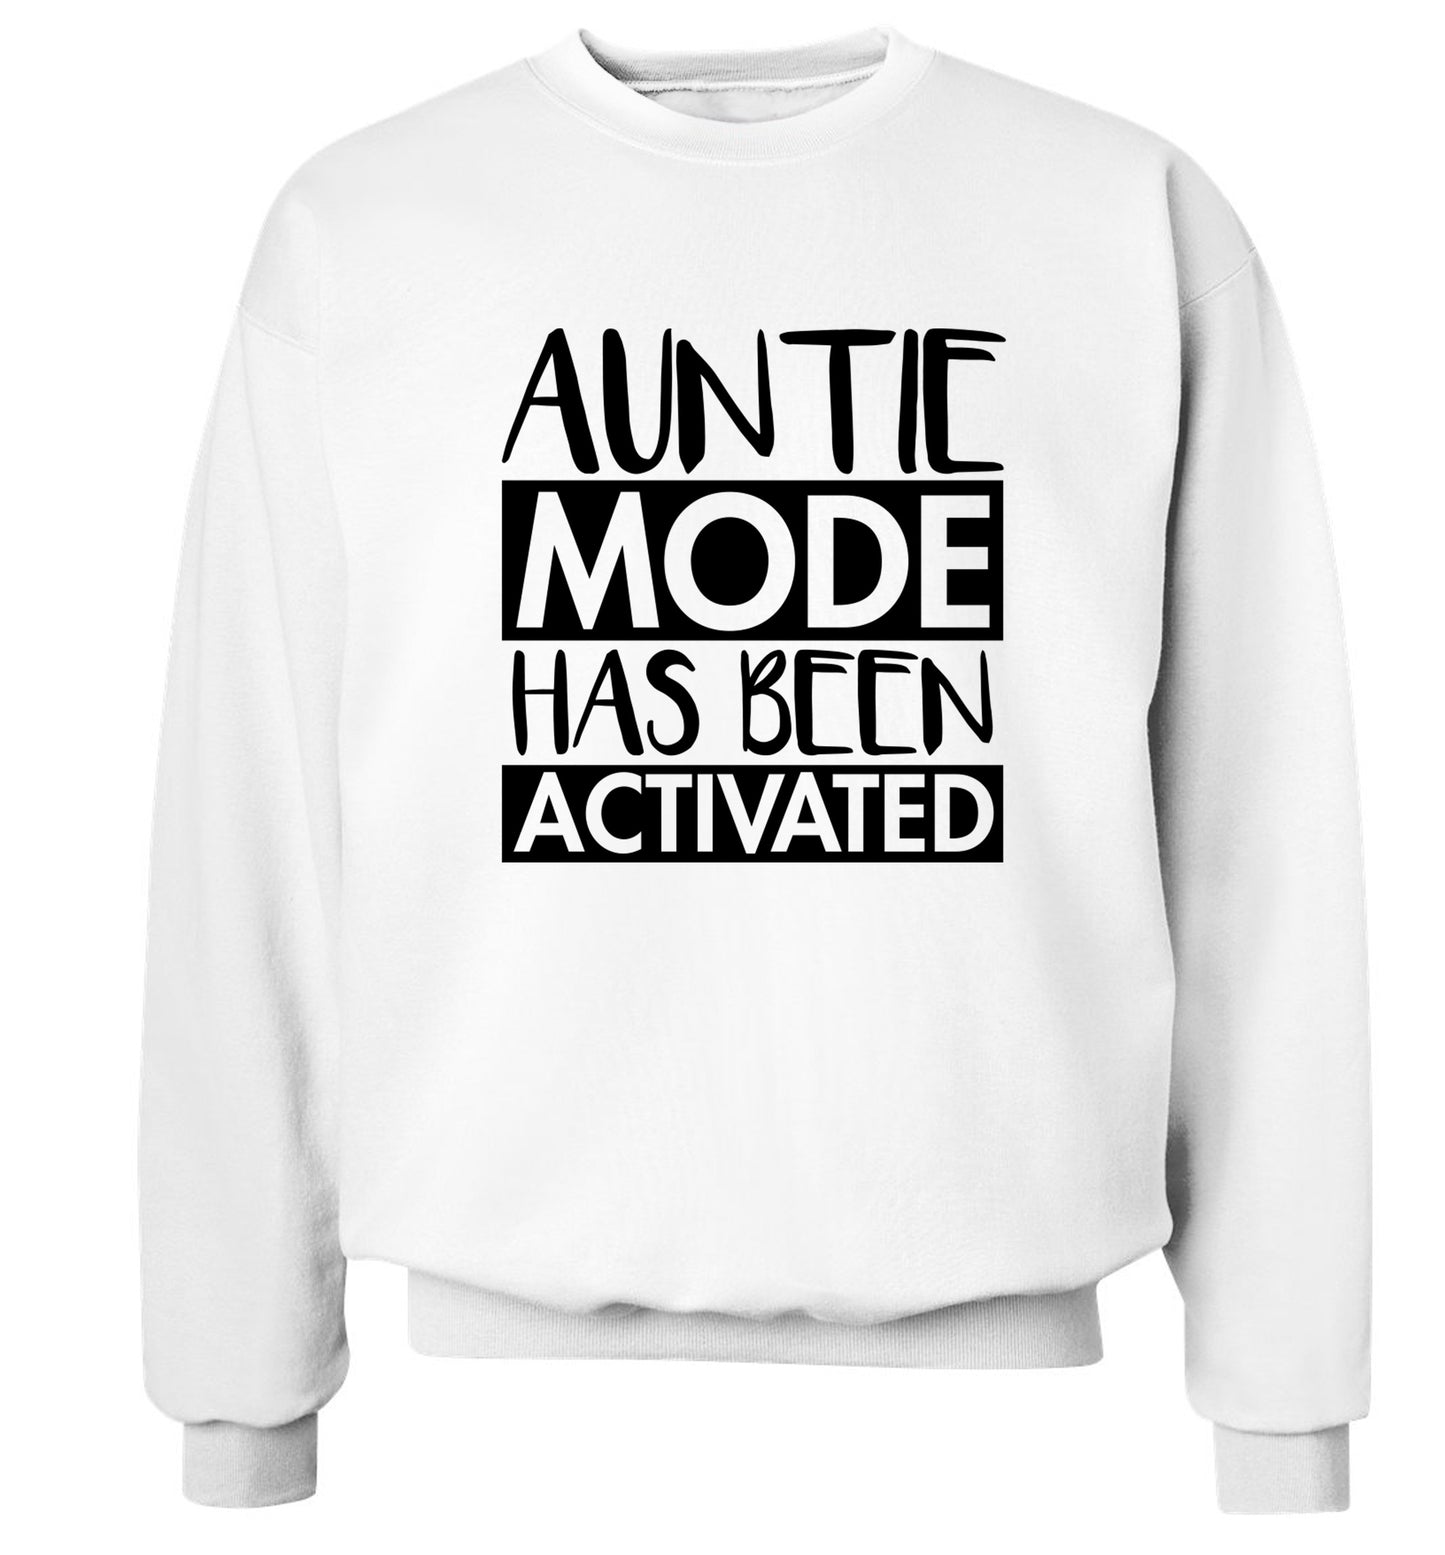 Auntie mode activated Adult's unisex white Sweater 2XL